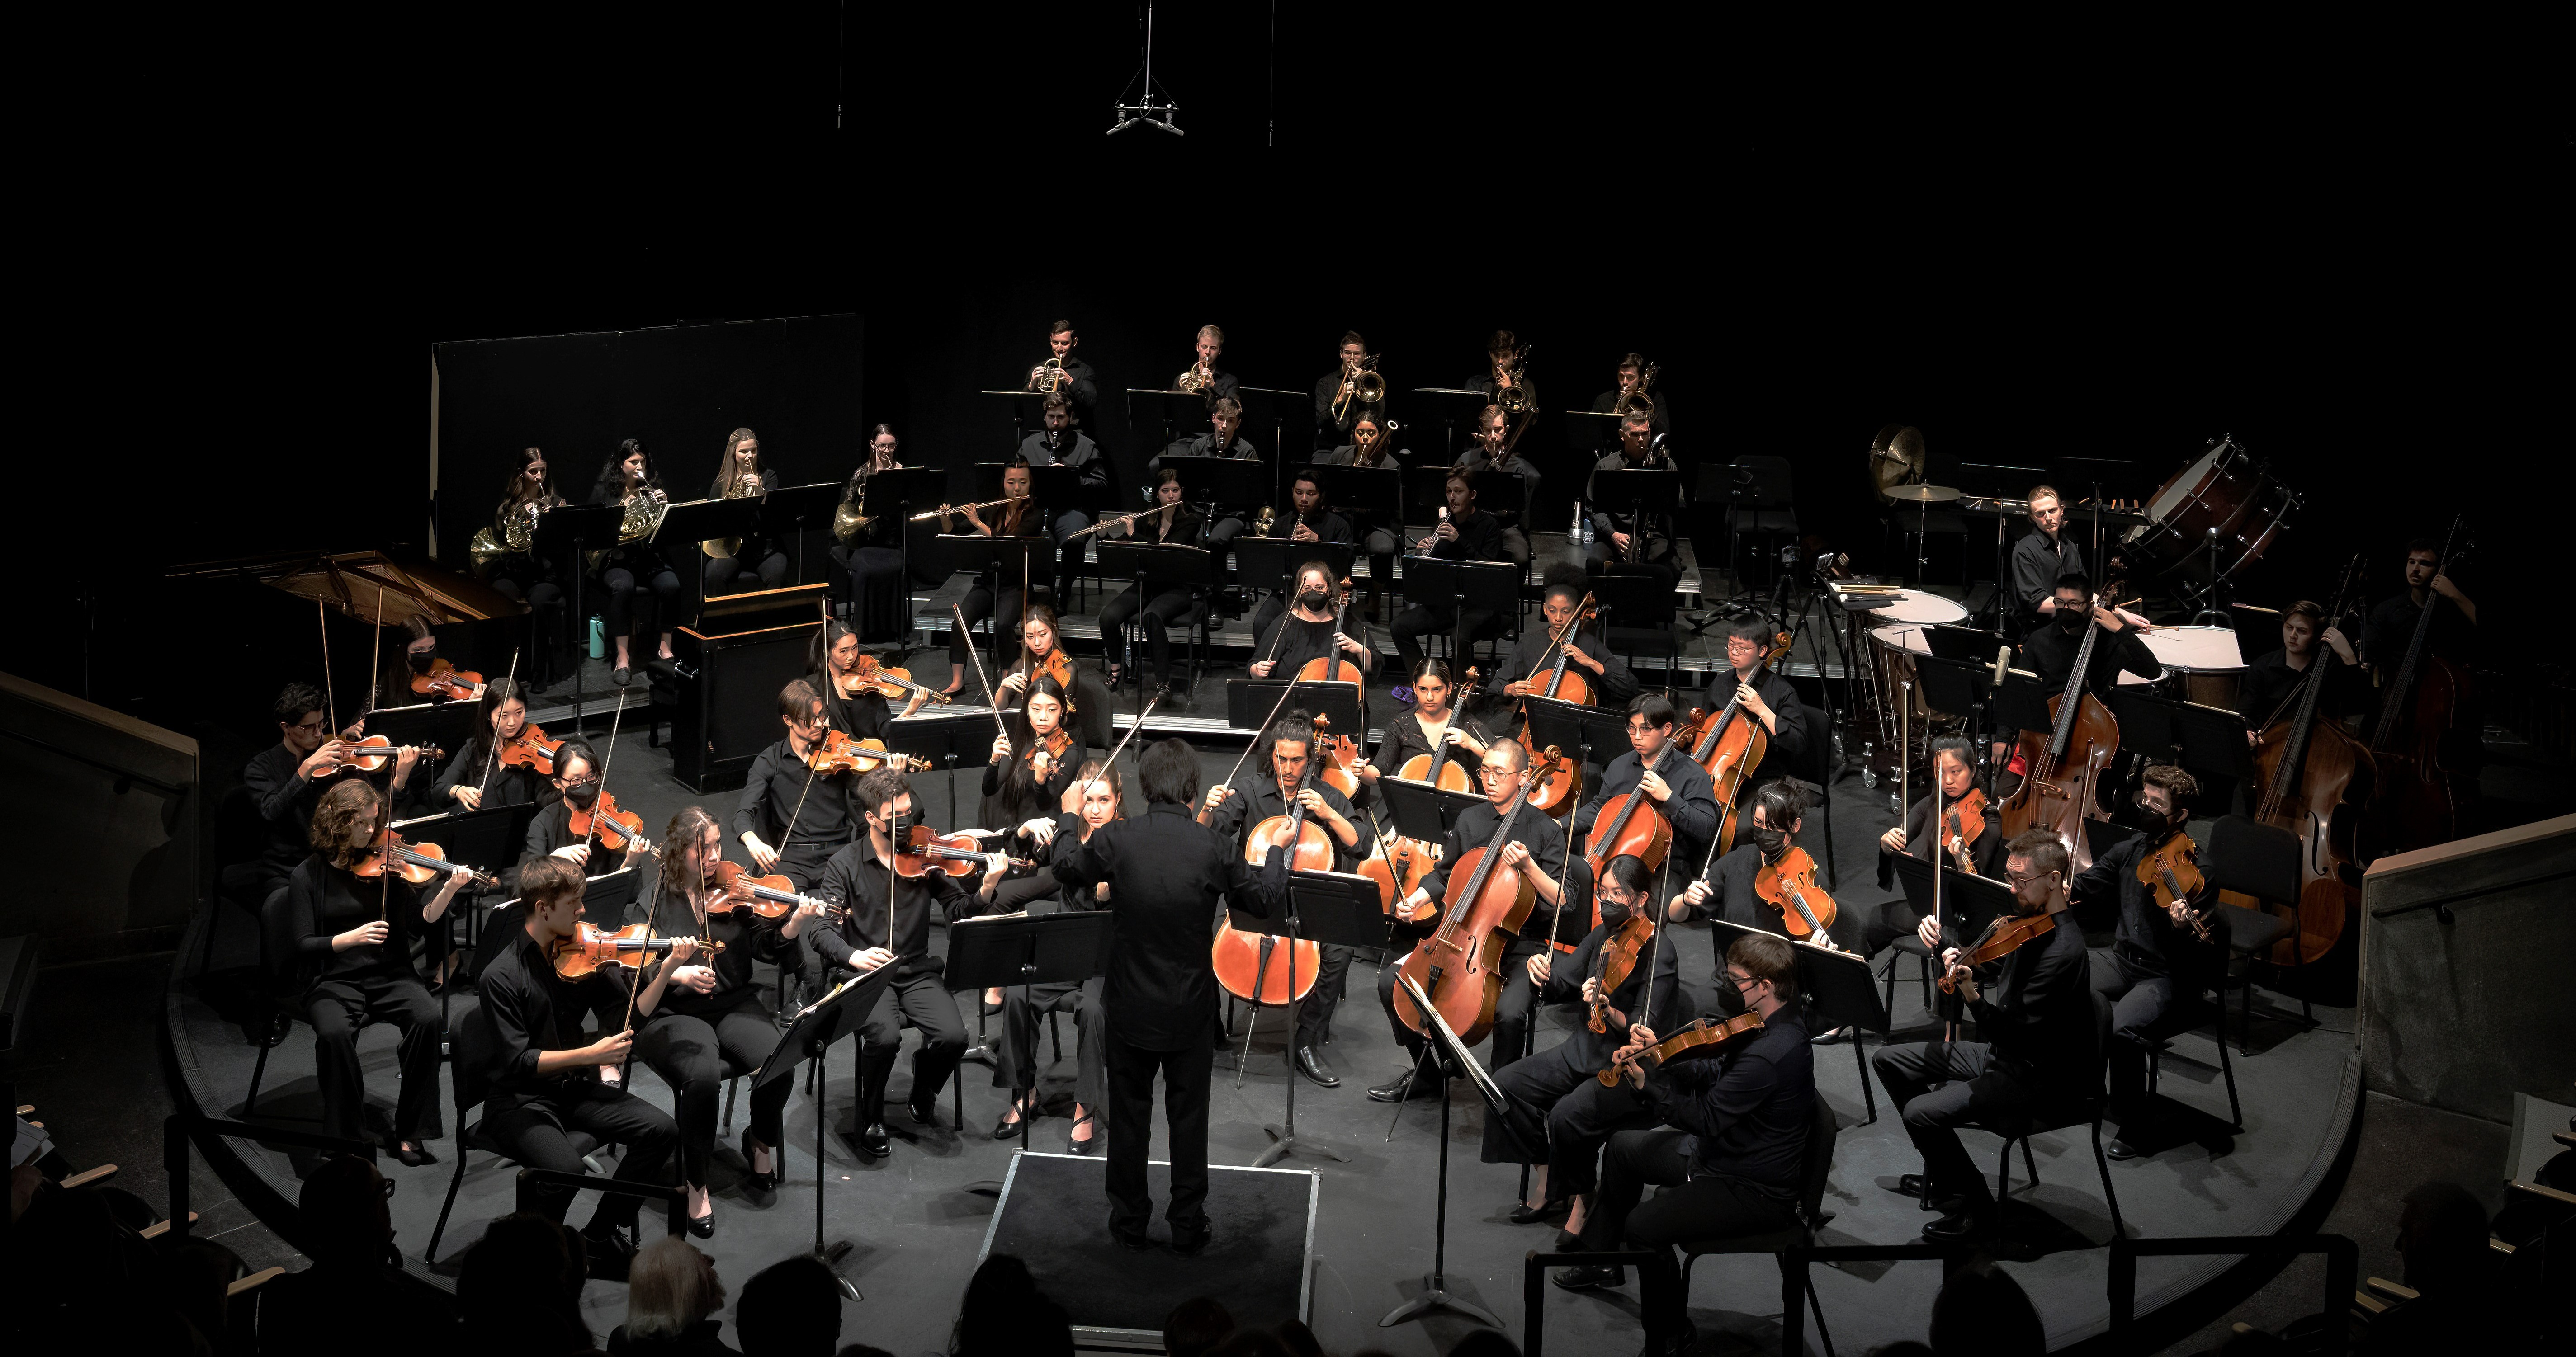 RS74608_20220614_smf-orchestra_7385-cropped.jpg